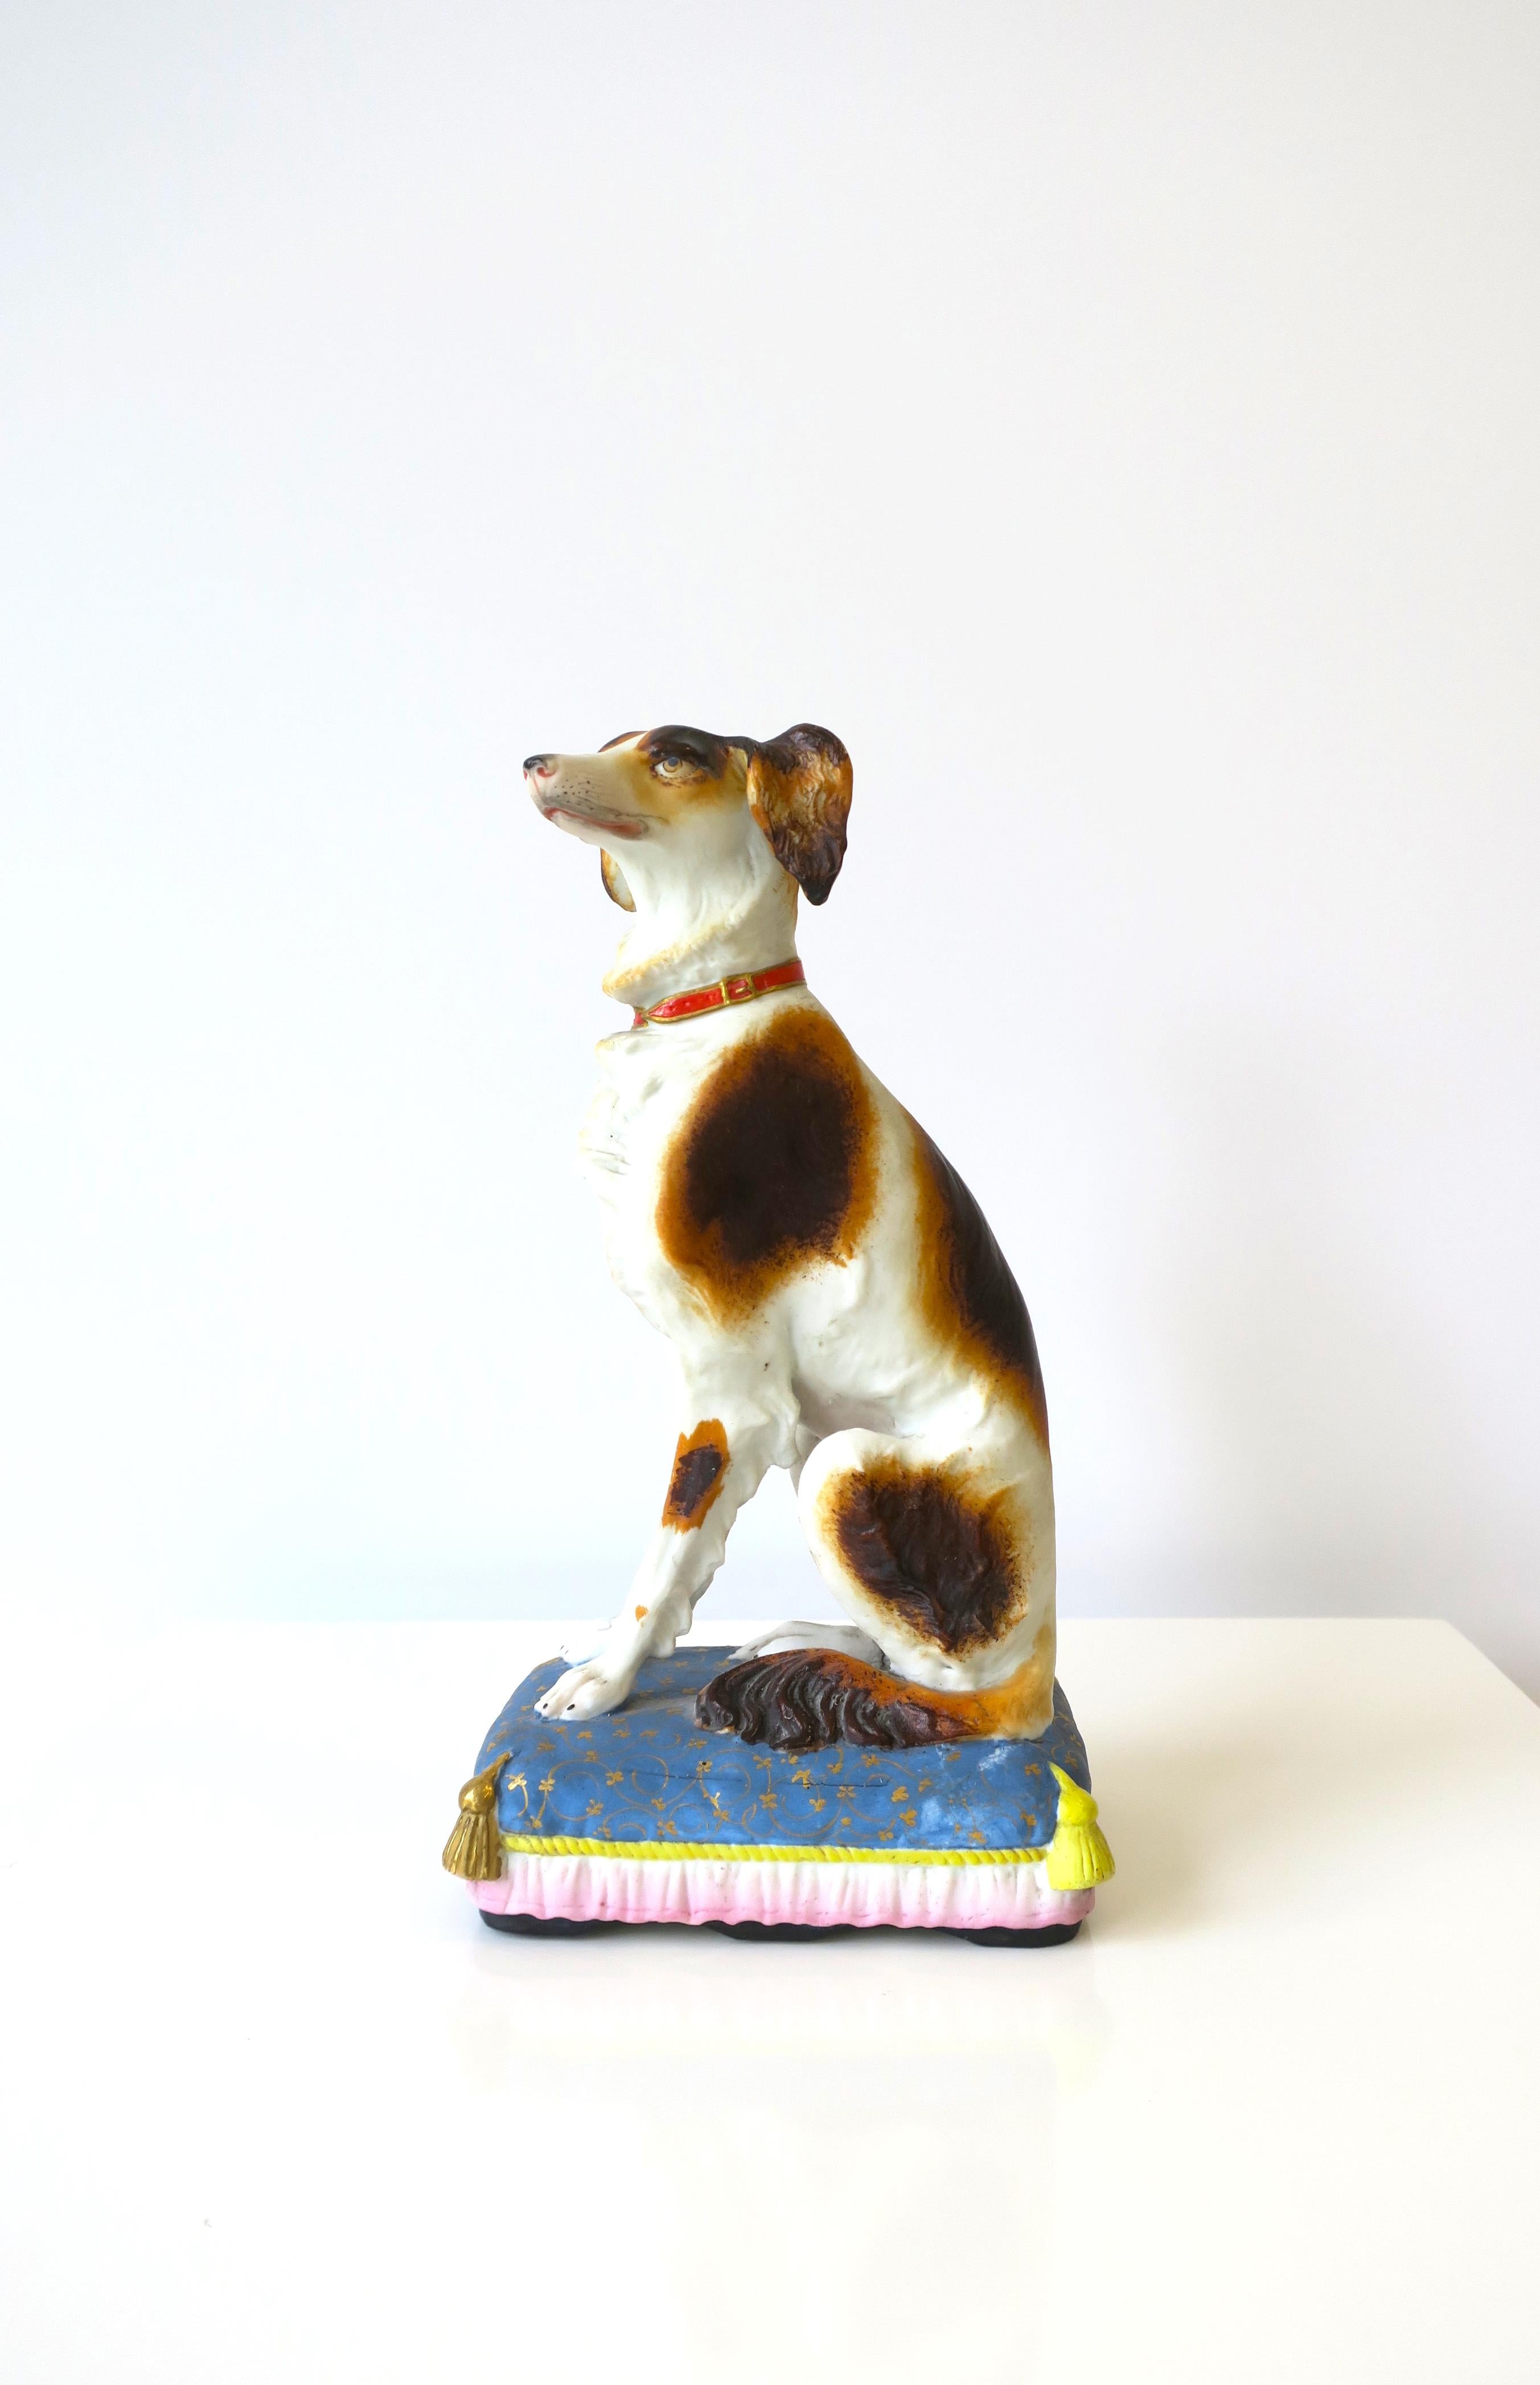 Unglazed Porcelain Dog on Pillow with Tassels Decorative Object, circa Mid-20th Century For Sale